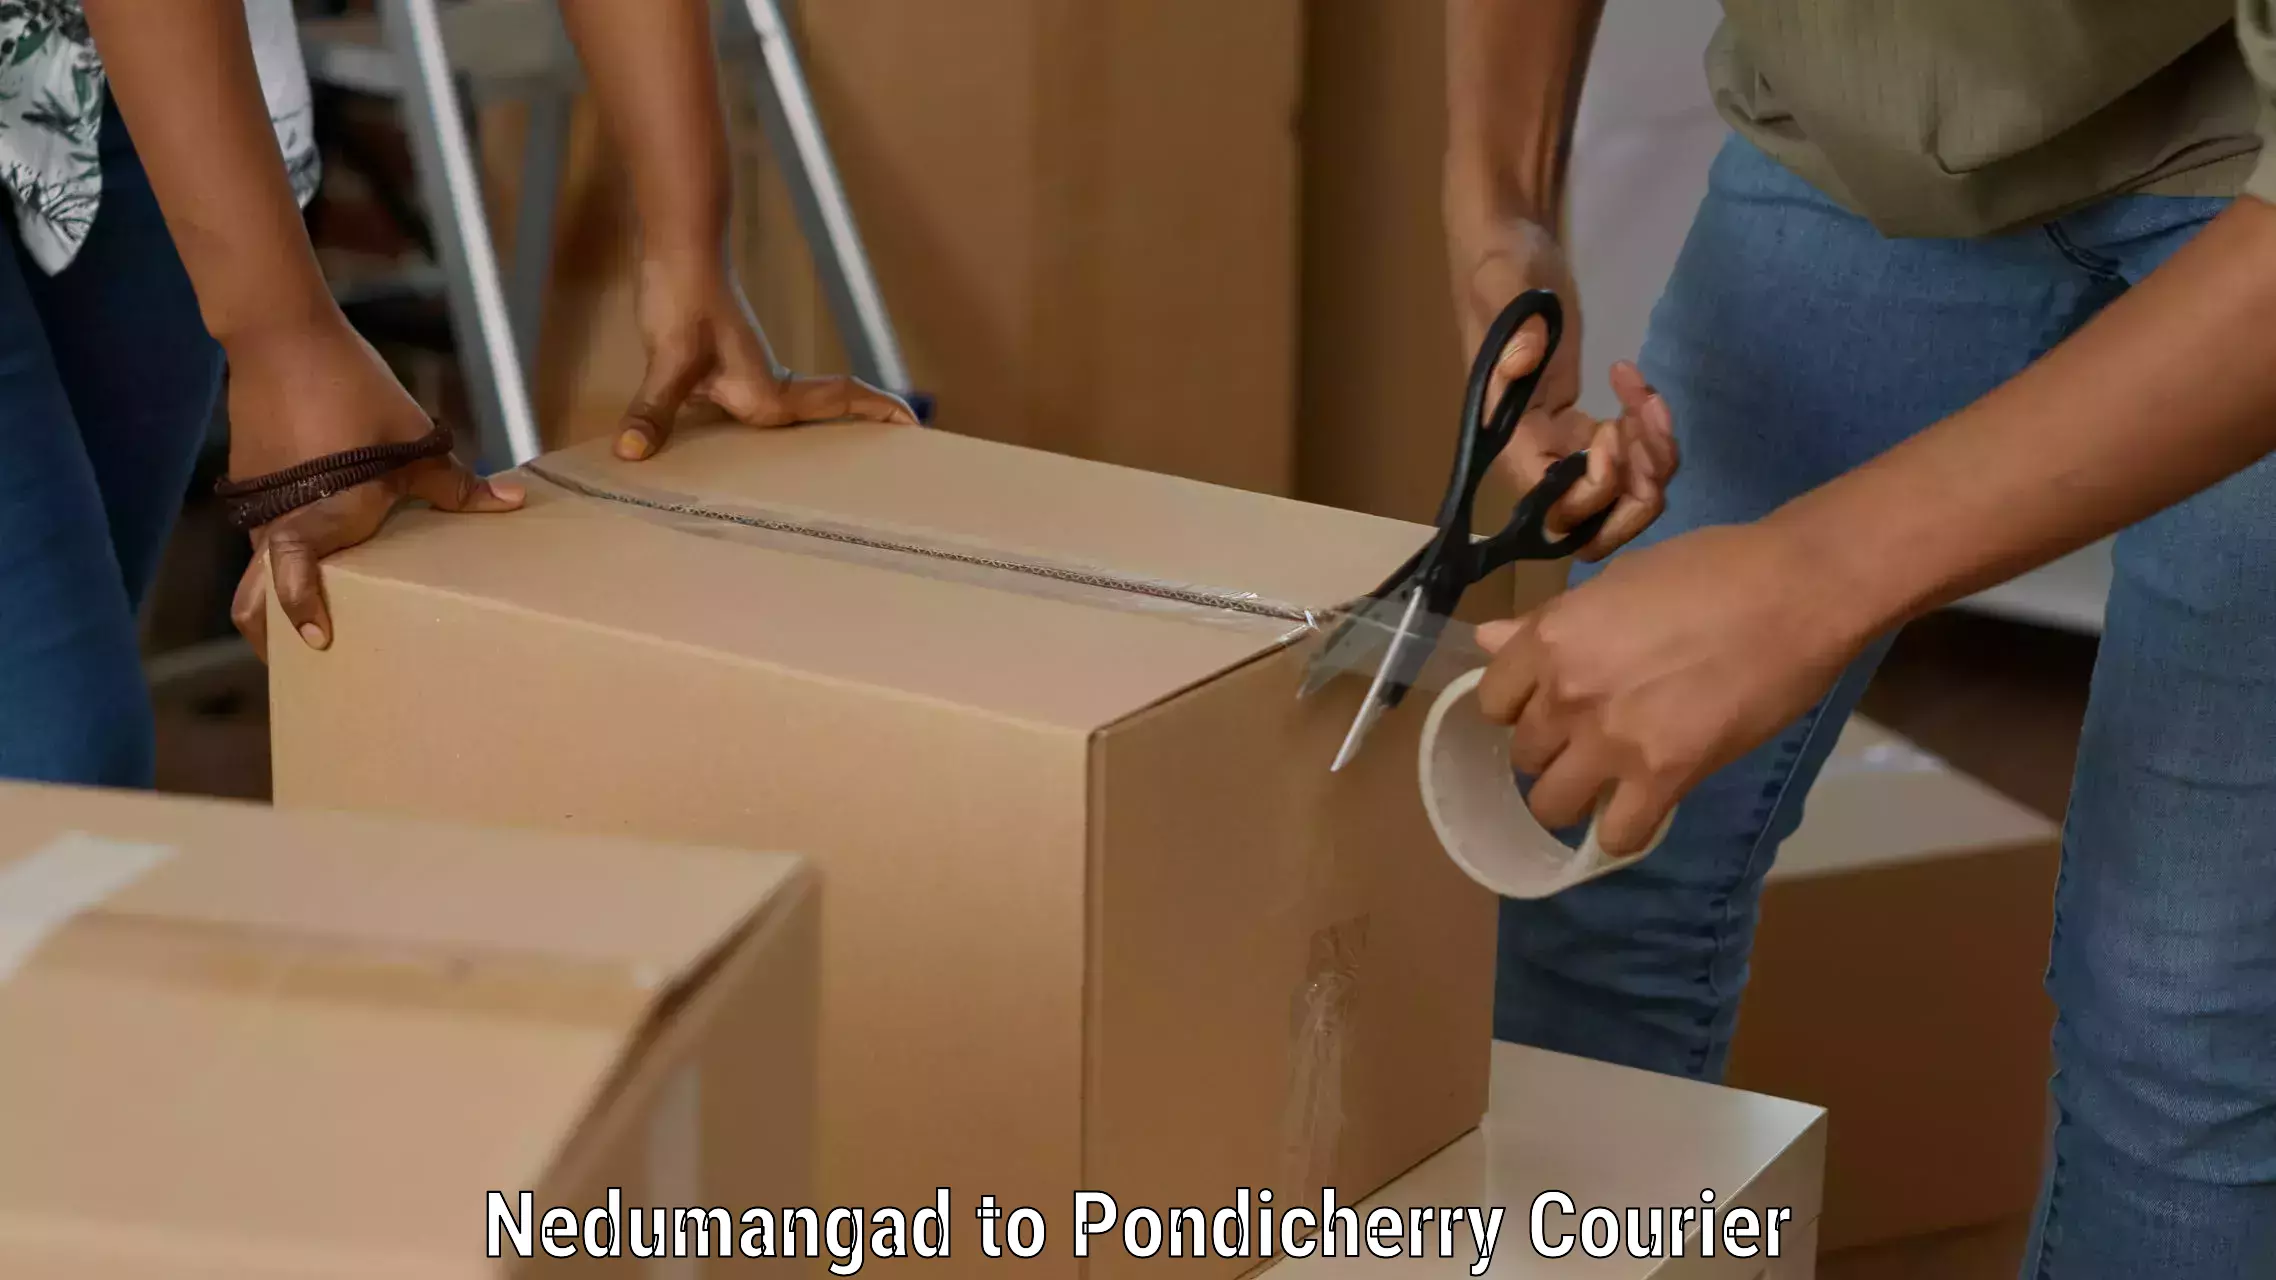 Easy access courier services Nedumangad to Pondicherry